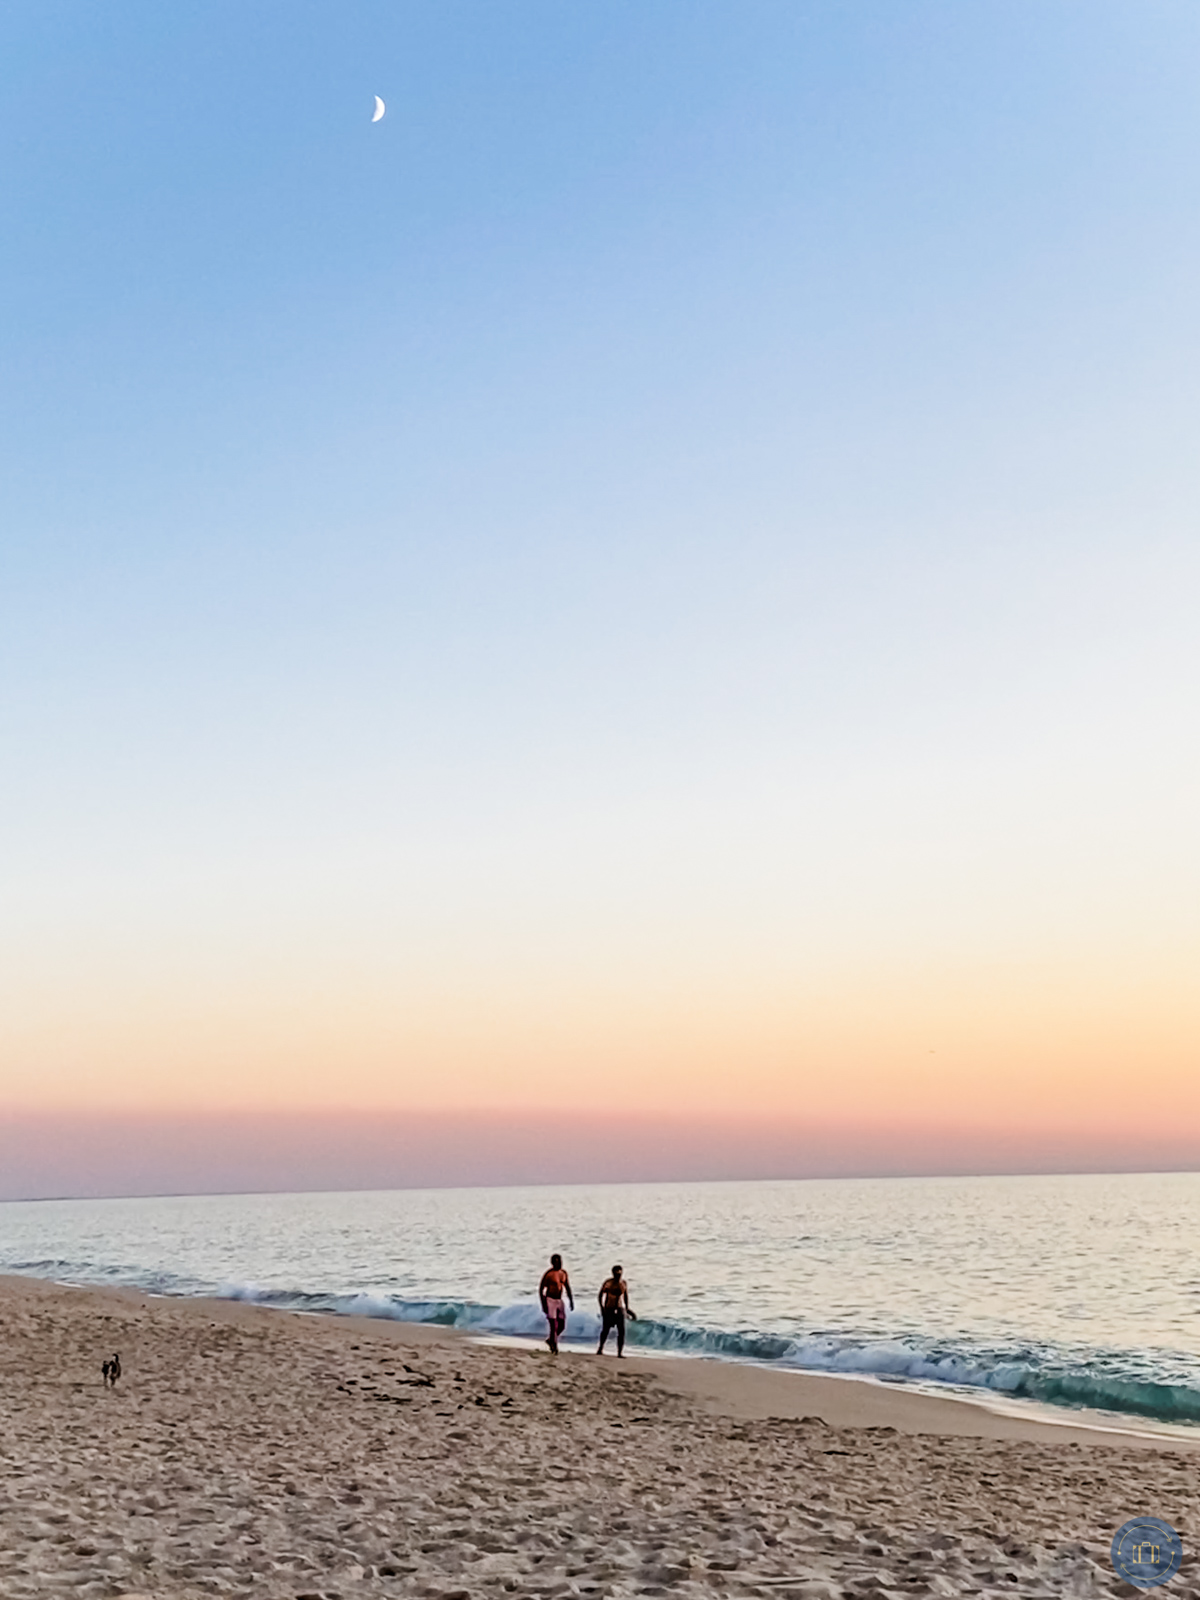 men walking on comporta beach in portugal at sunset with moon high in sky